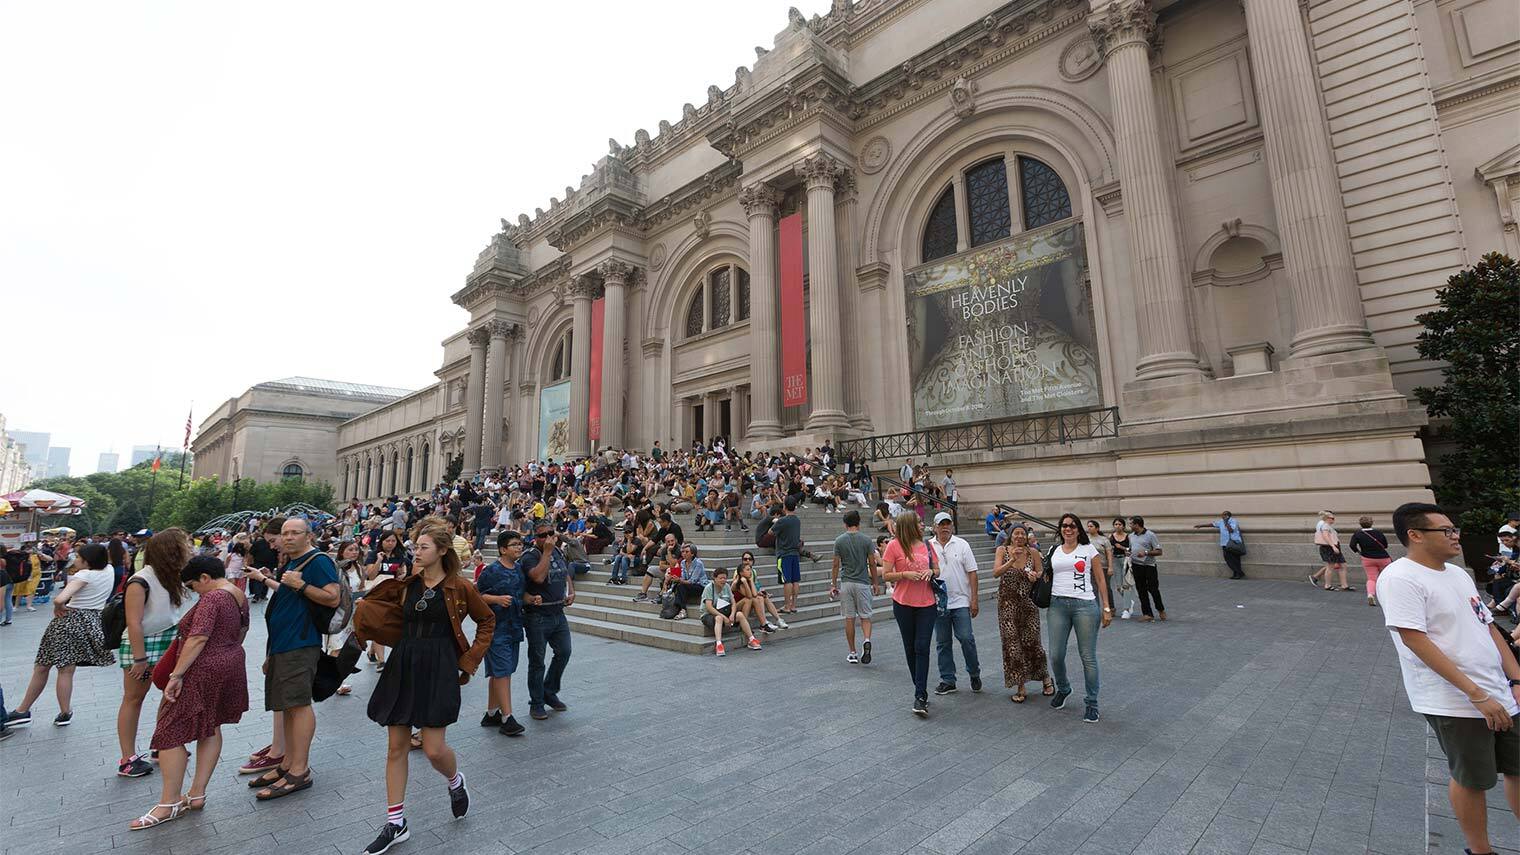 A photo of a crowd gathered in The Met's plaza